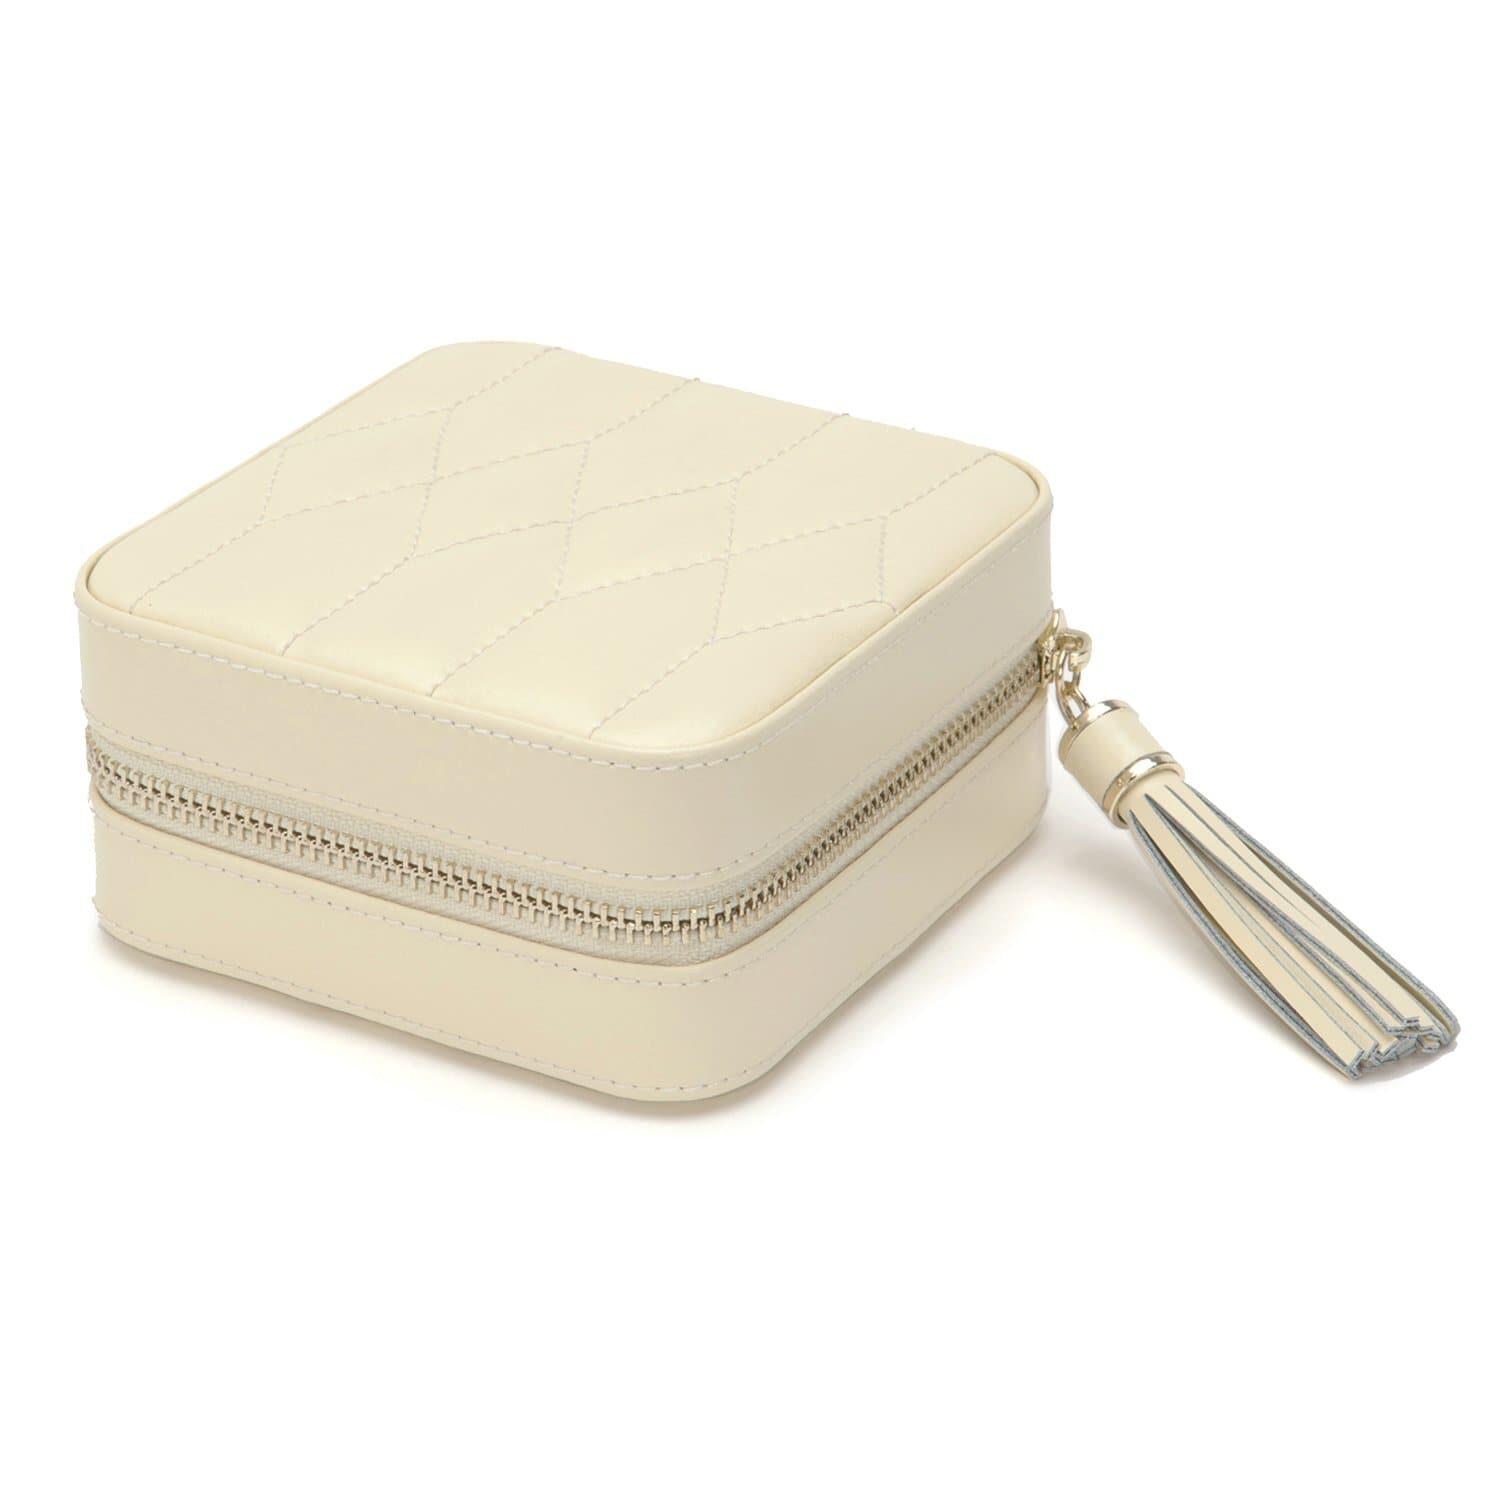 Wolf Caroline Quilted Leather Zip Travel Jewellery Case in Ivory - The Classic Watch Buyers Club Ltd